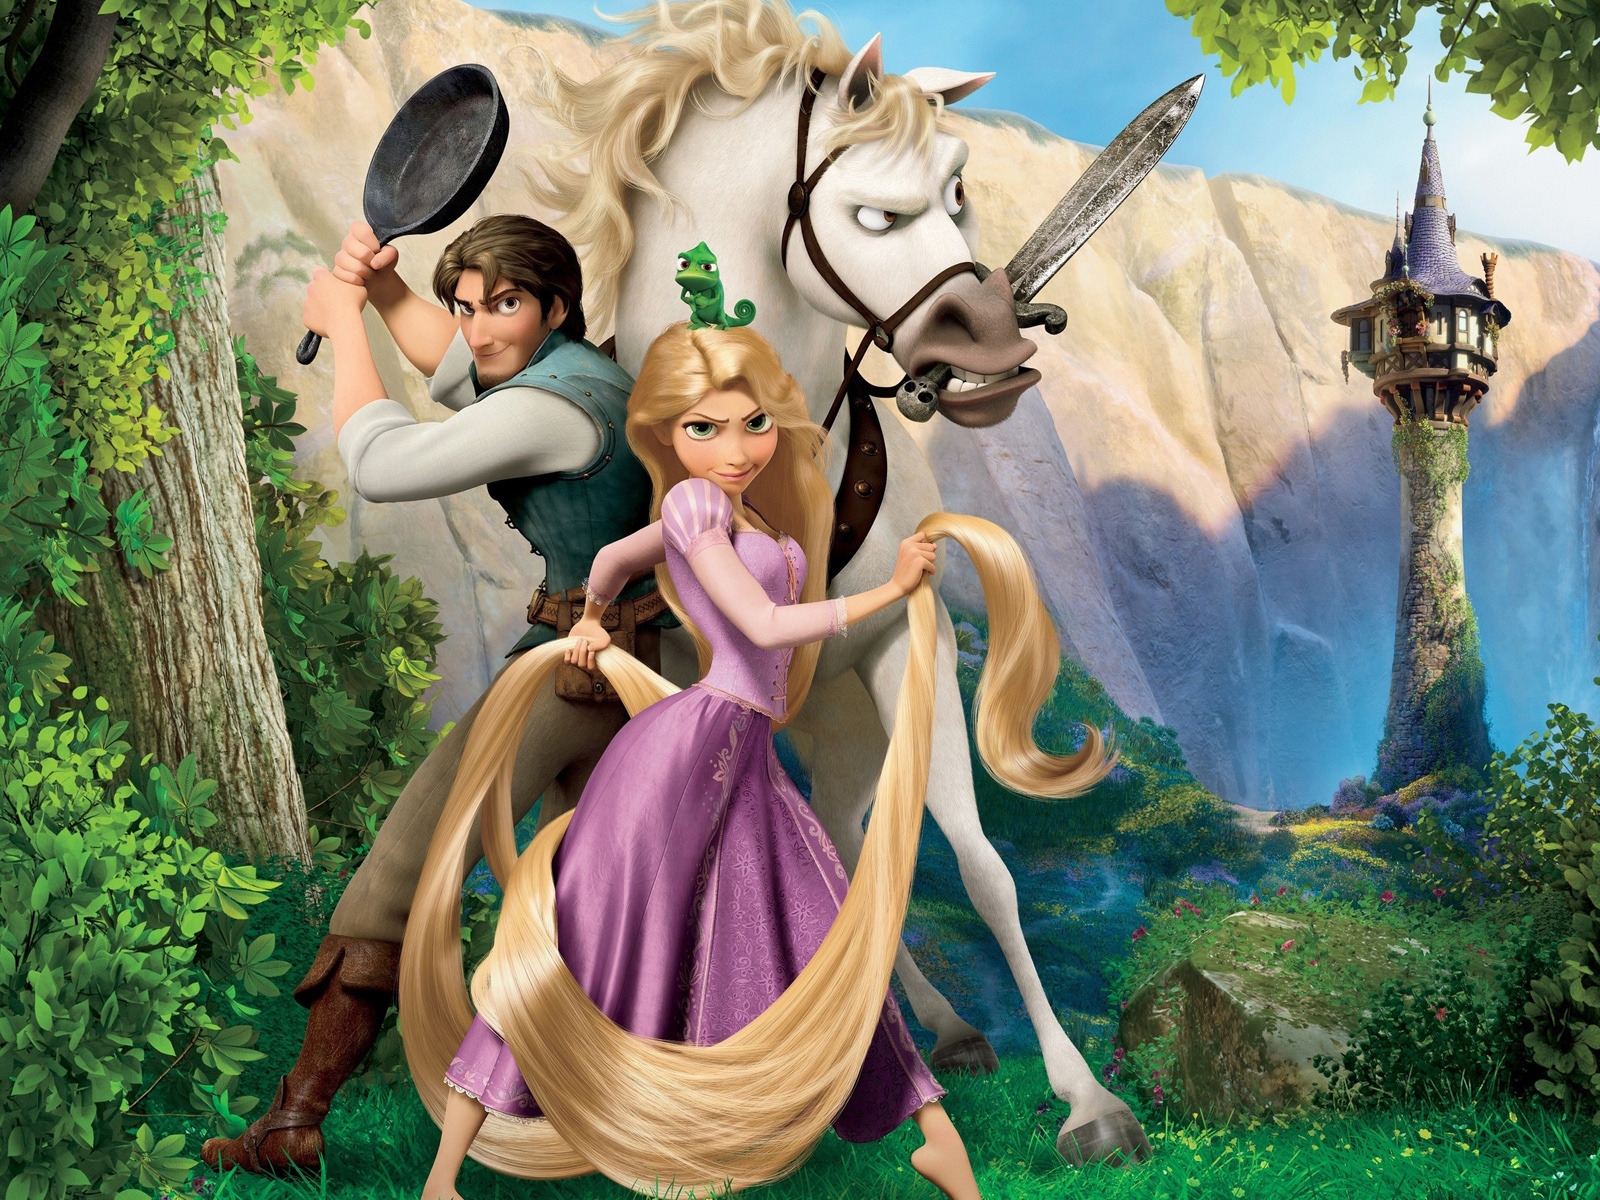 Tangled Animated Musical Film for 1600 x 1200 resolution